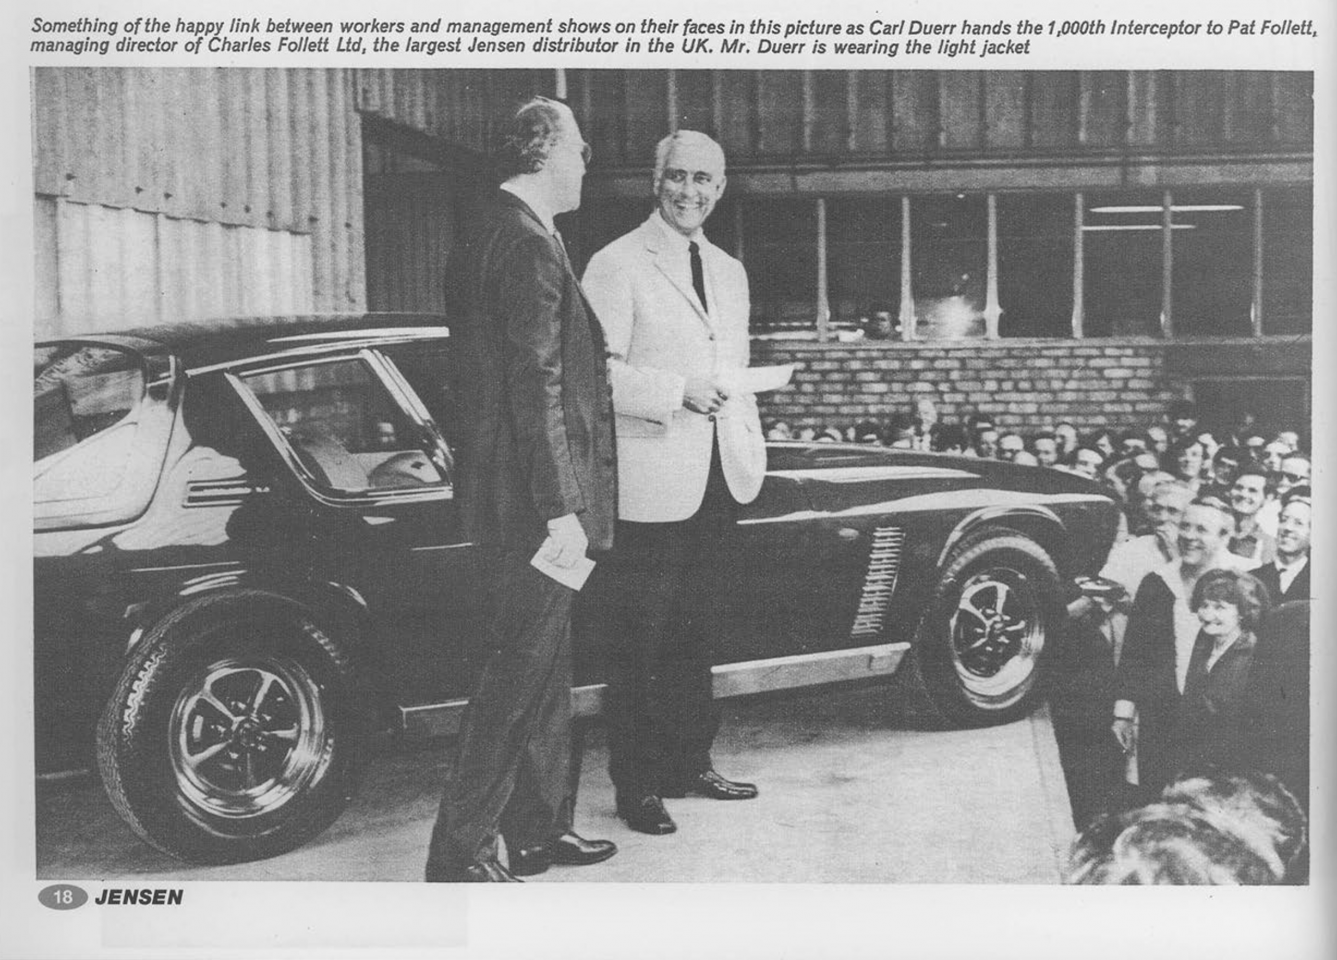 Factory photo shoot as Carl hands my car over to Pat Follet leading Jensen distributor in UK in 1969